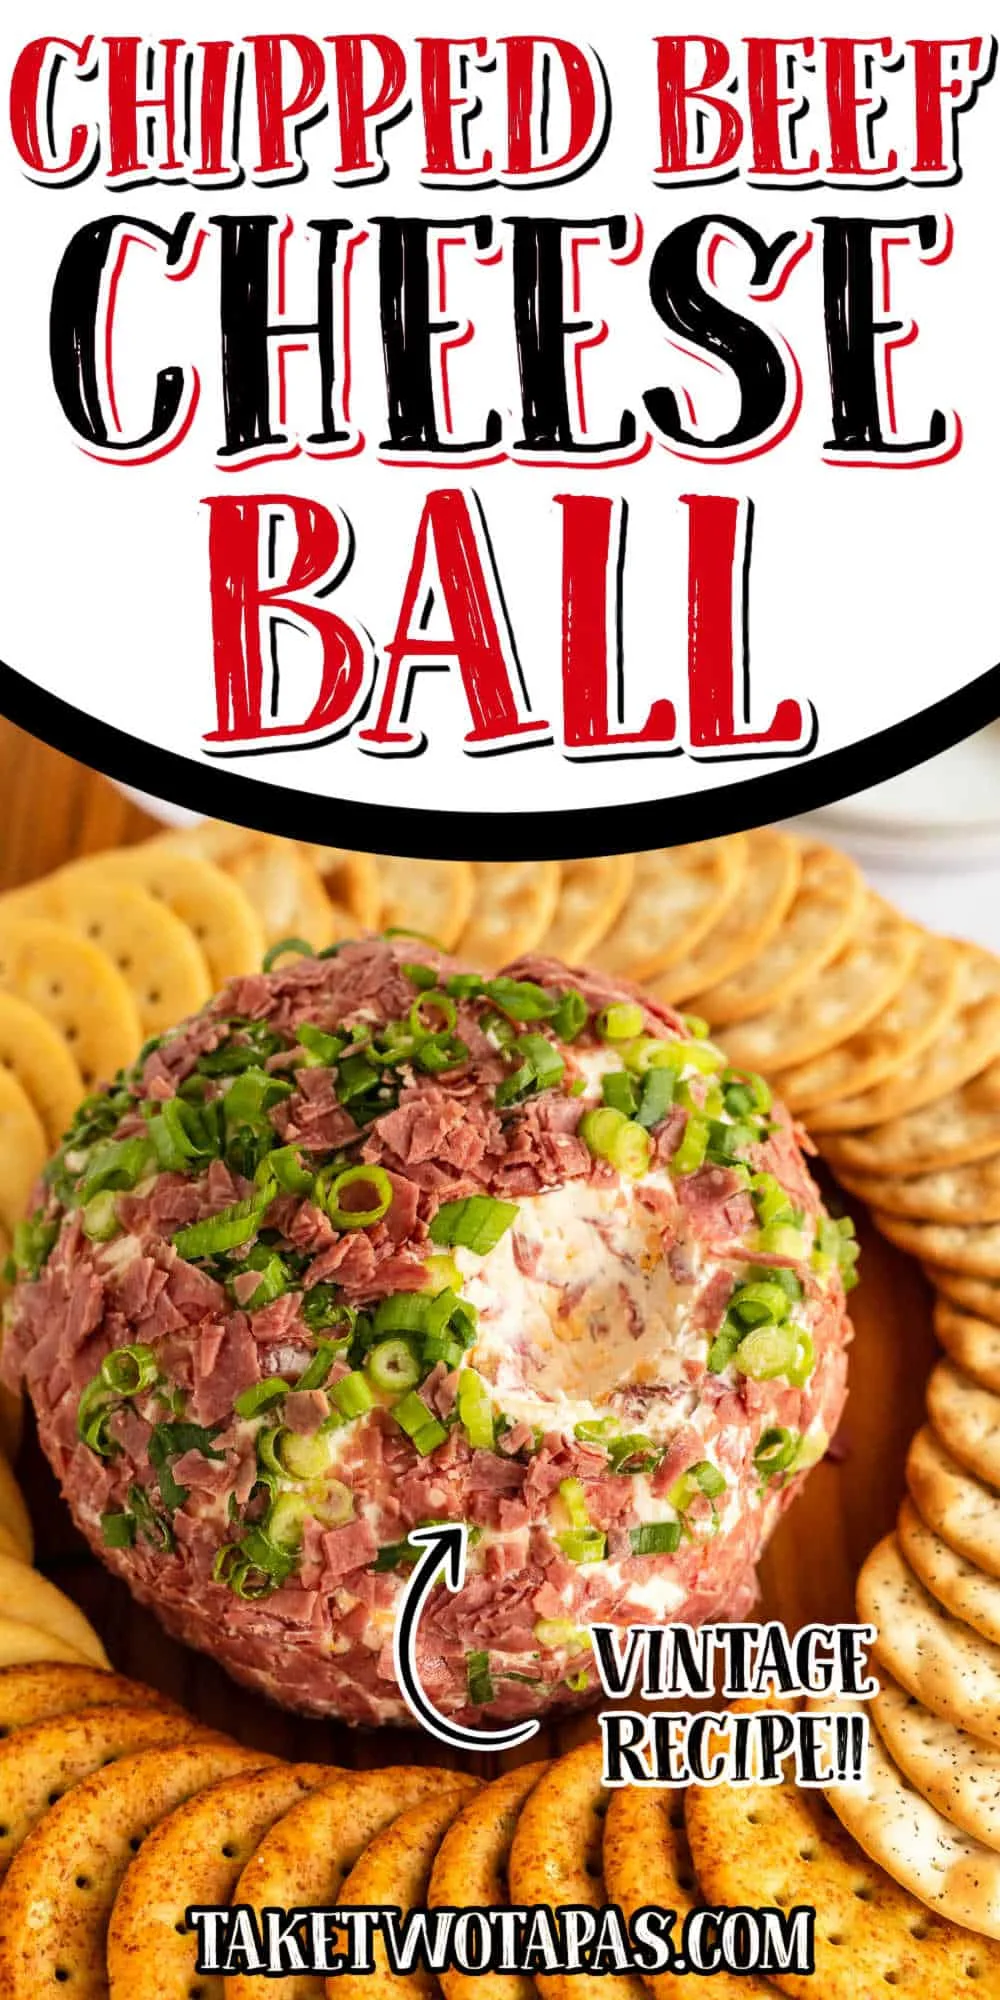 cheese ball with text "chipped beef vintage recipe"